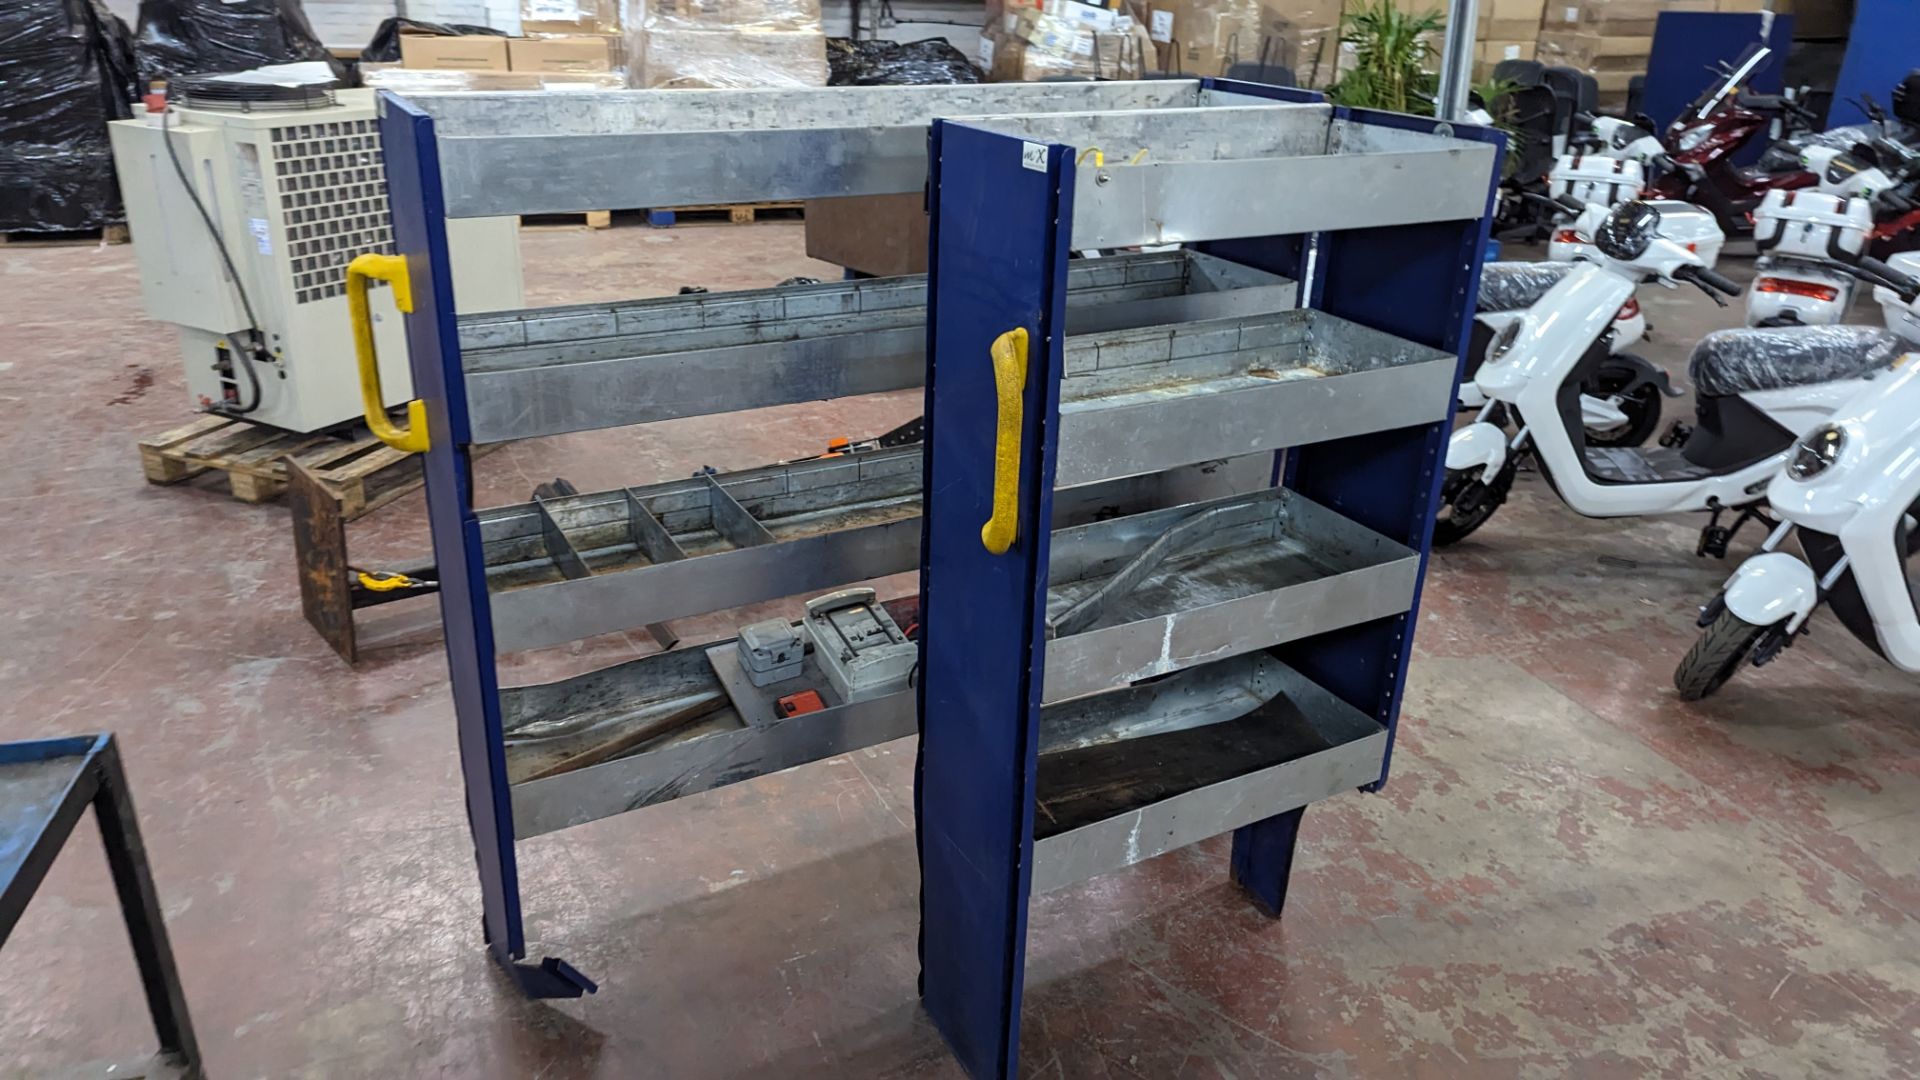 2 off Modula Racking van racks, each with a yellow handle at one end, understood to have been remove